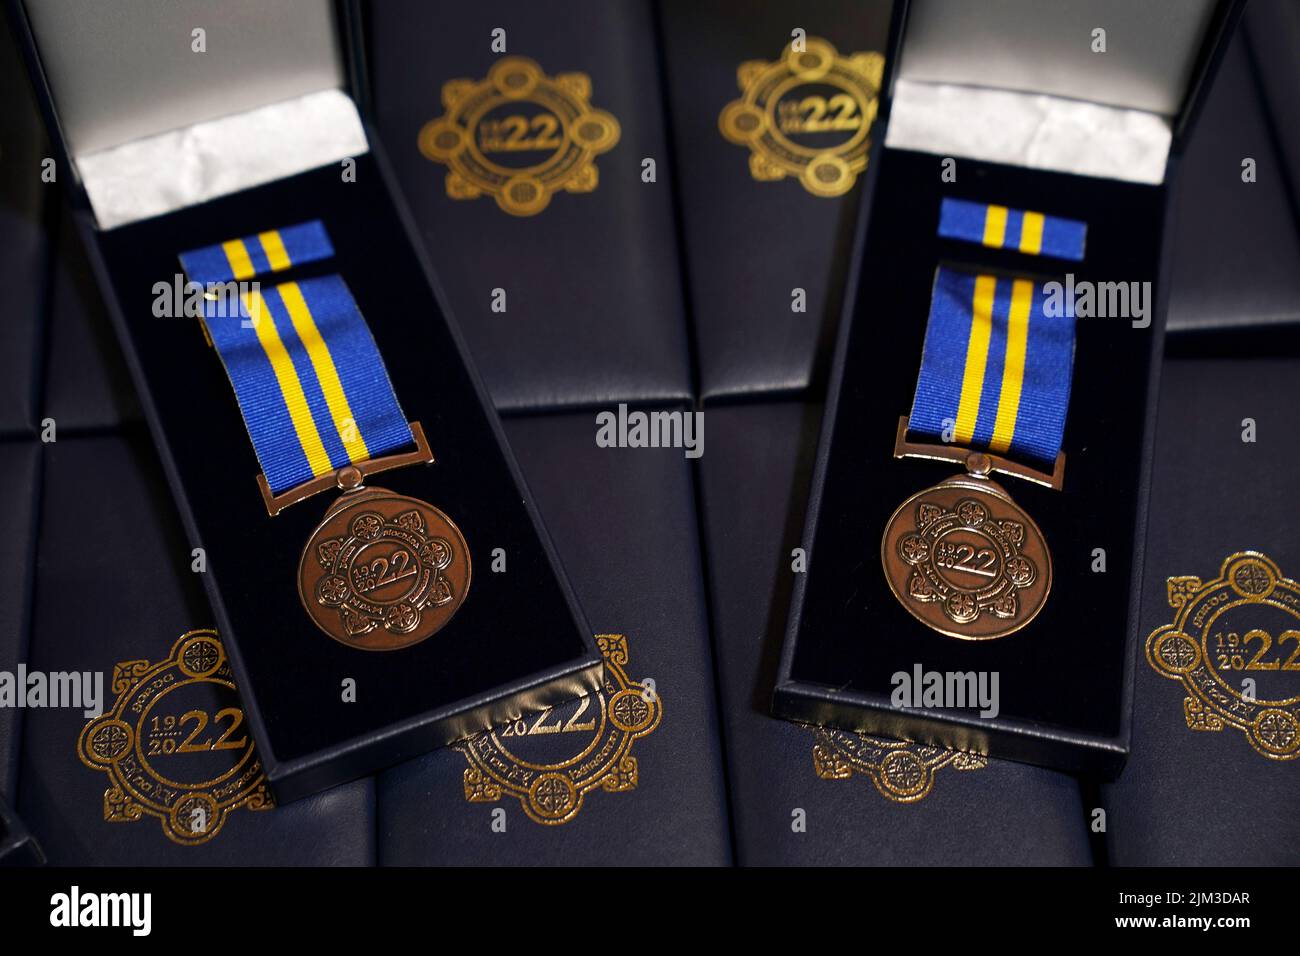 A view of specially designed and produced Commemorative Centenary Medals at a ceremony held by An Garda Síochána, as part of their Centenary Commemorations, to present serving and retired Garda personnel with a Commemorative Centenary Medal/Coin. Picture date: Thursday August 4, 2022. Stock Photo